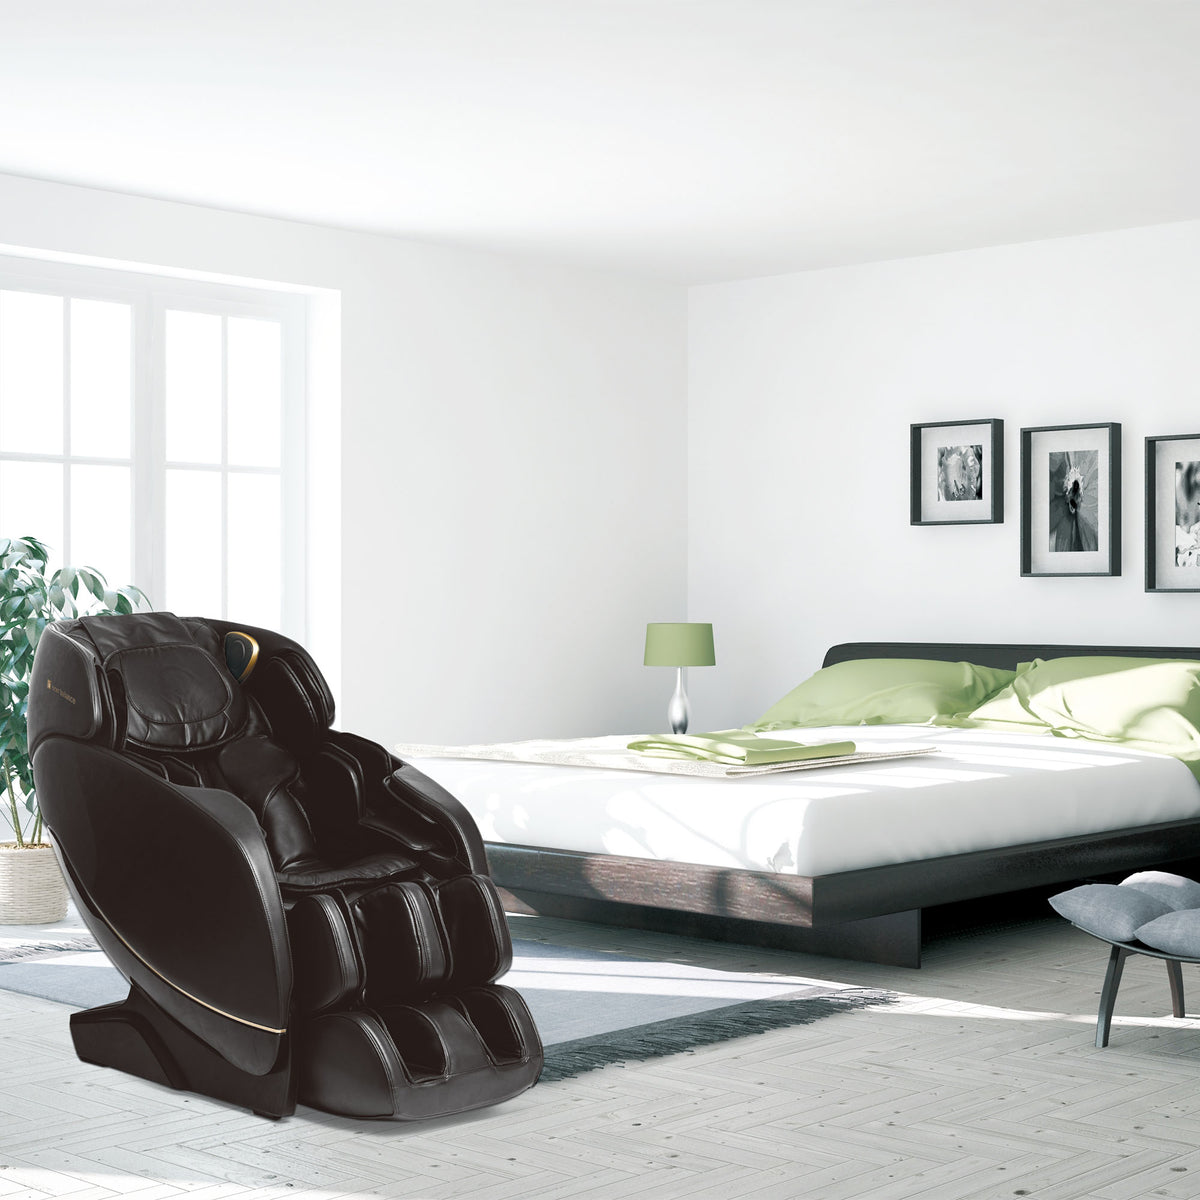 Inner Balance Wellness Jin 2.0 Massage Chair positioned in a cozy bedroom setting